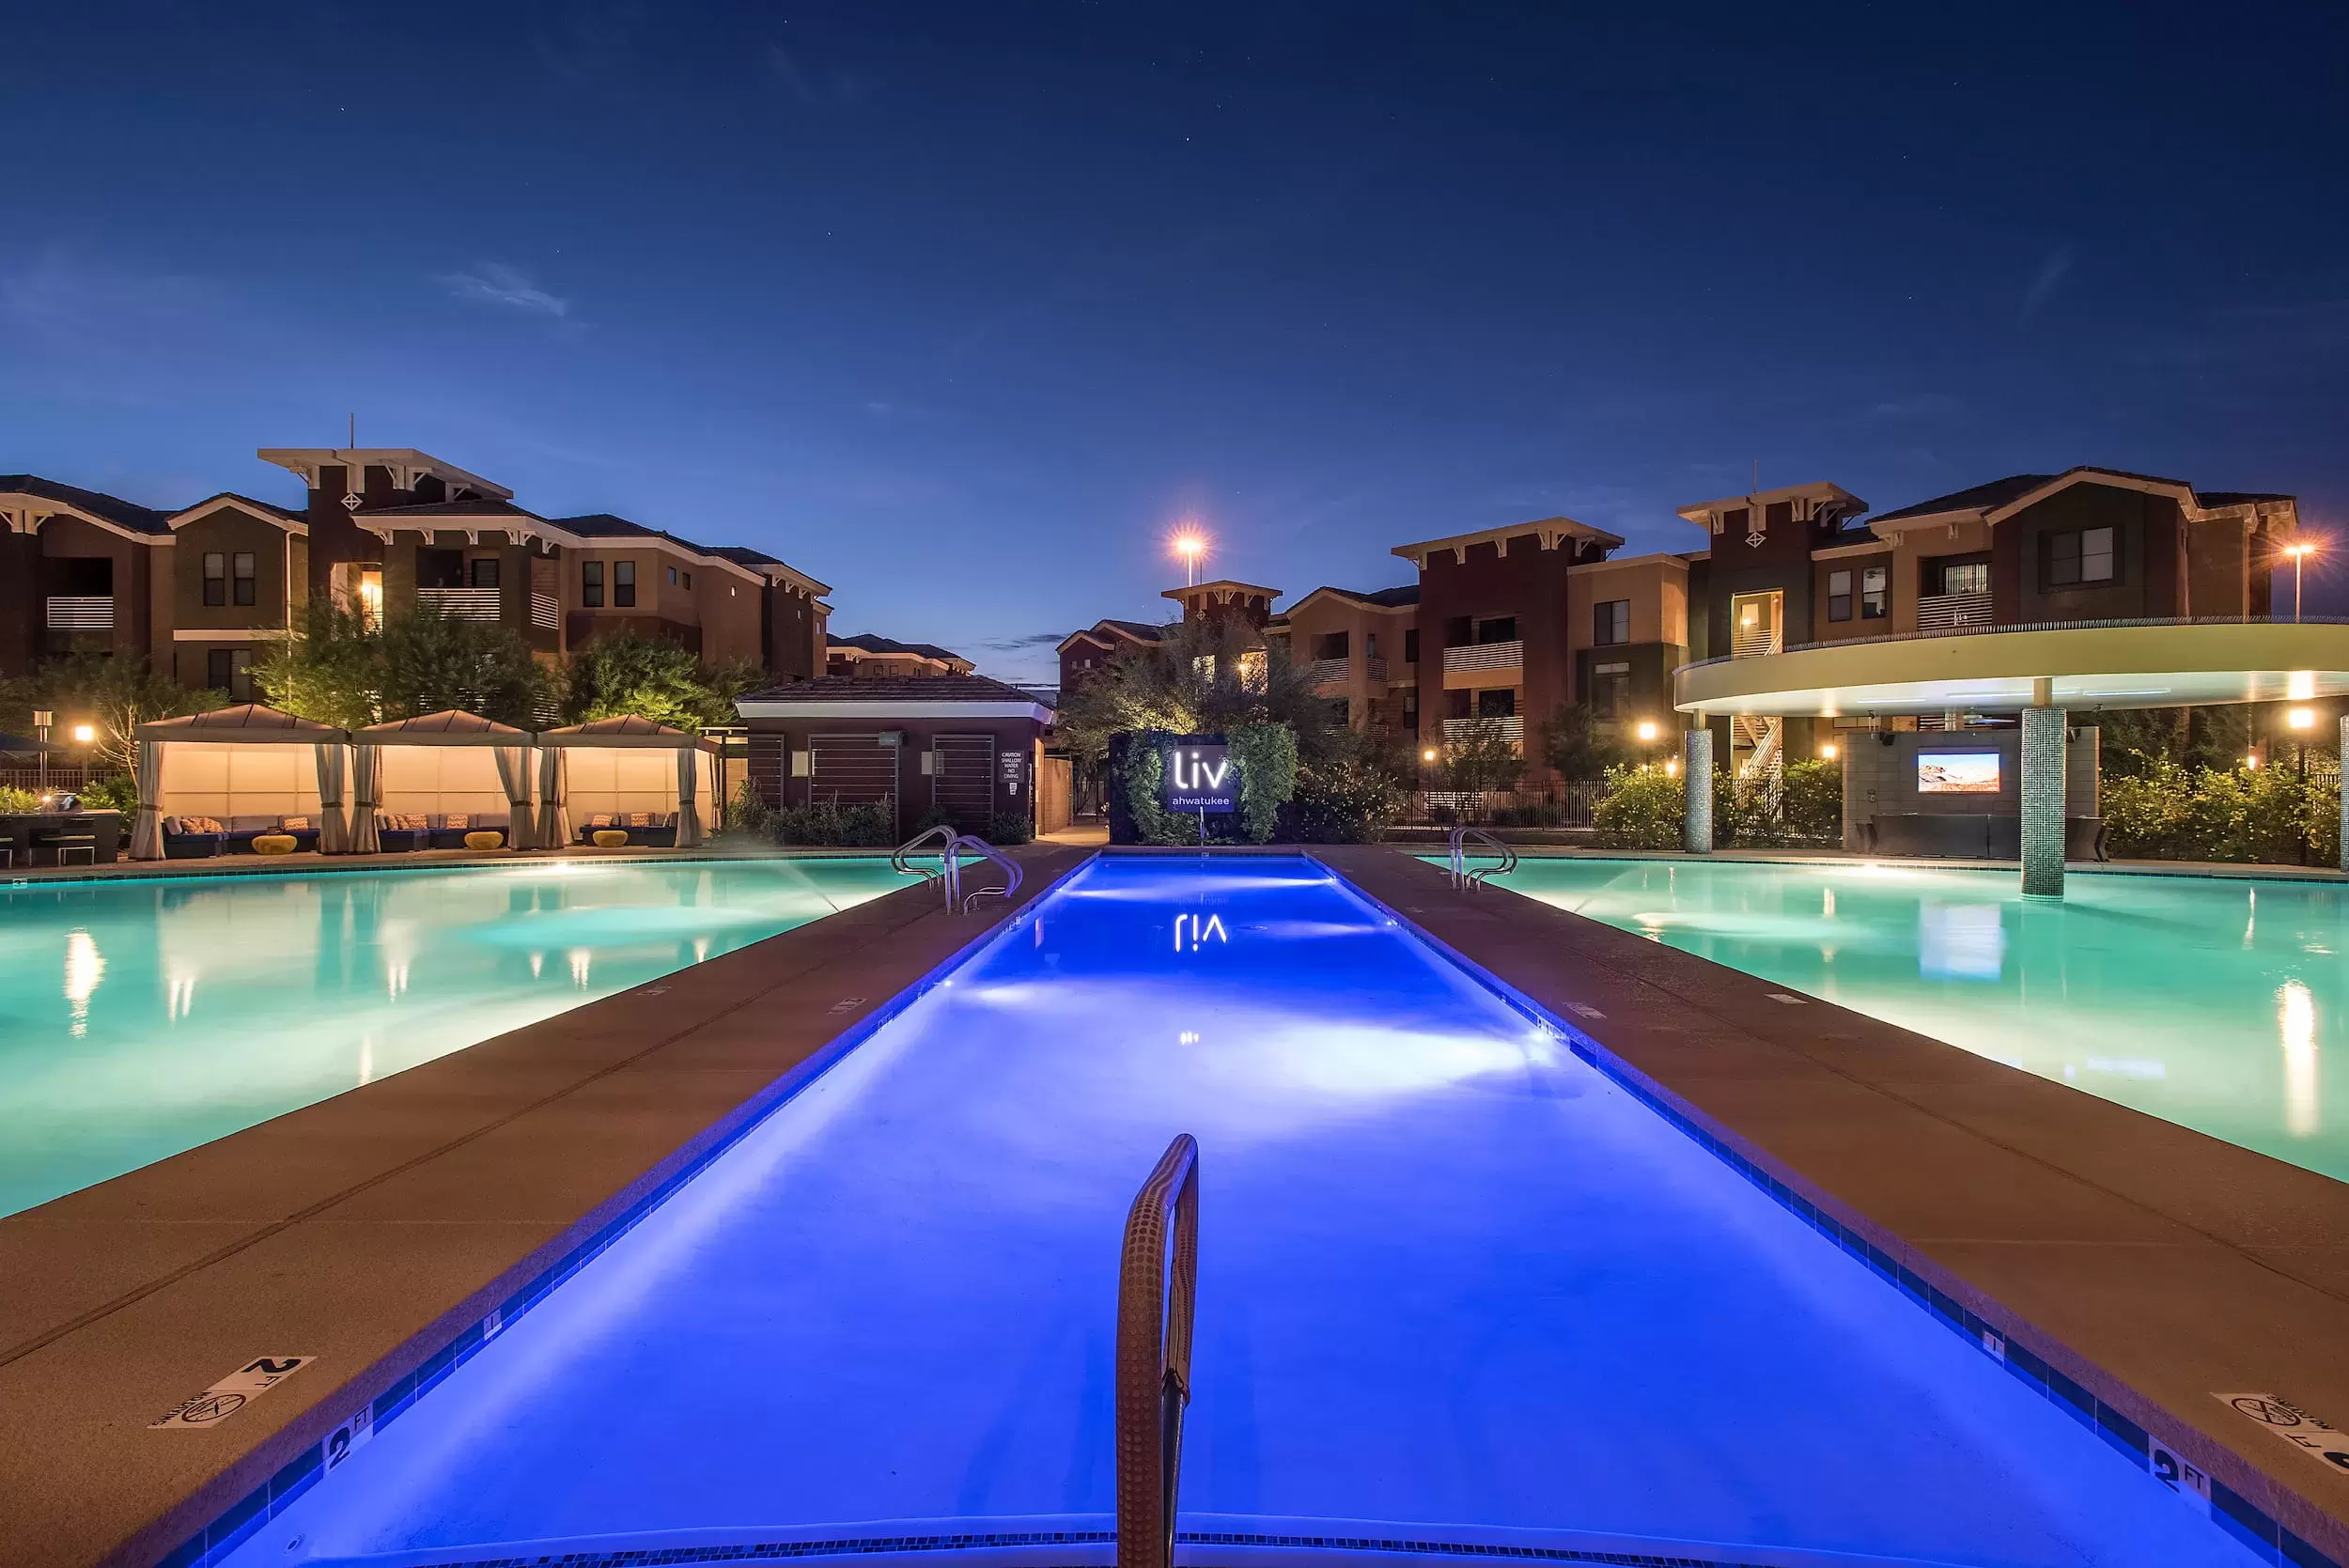 The pools lit up at night under a clear sky at Liv Ahwatukee.